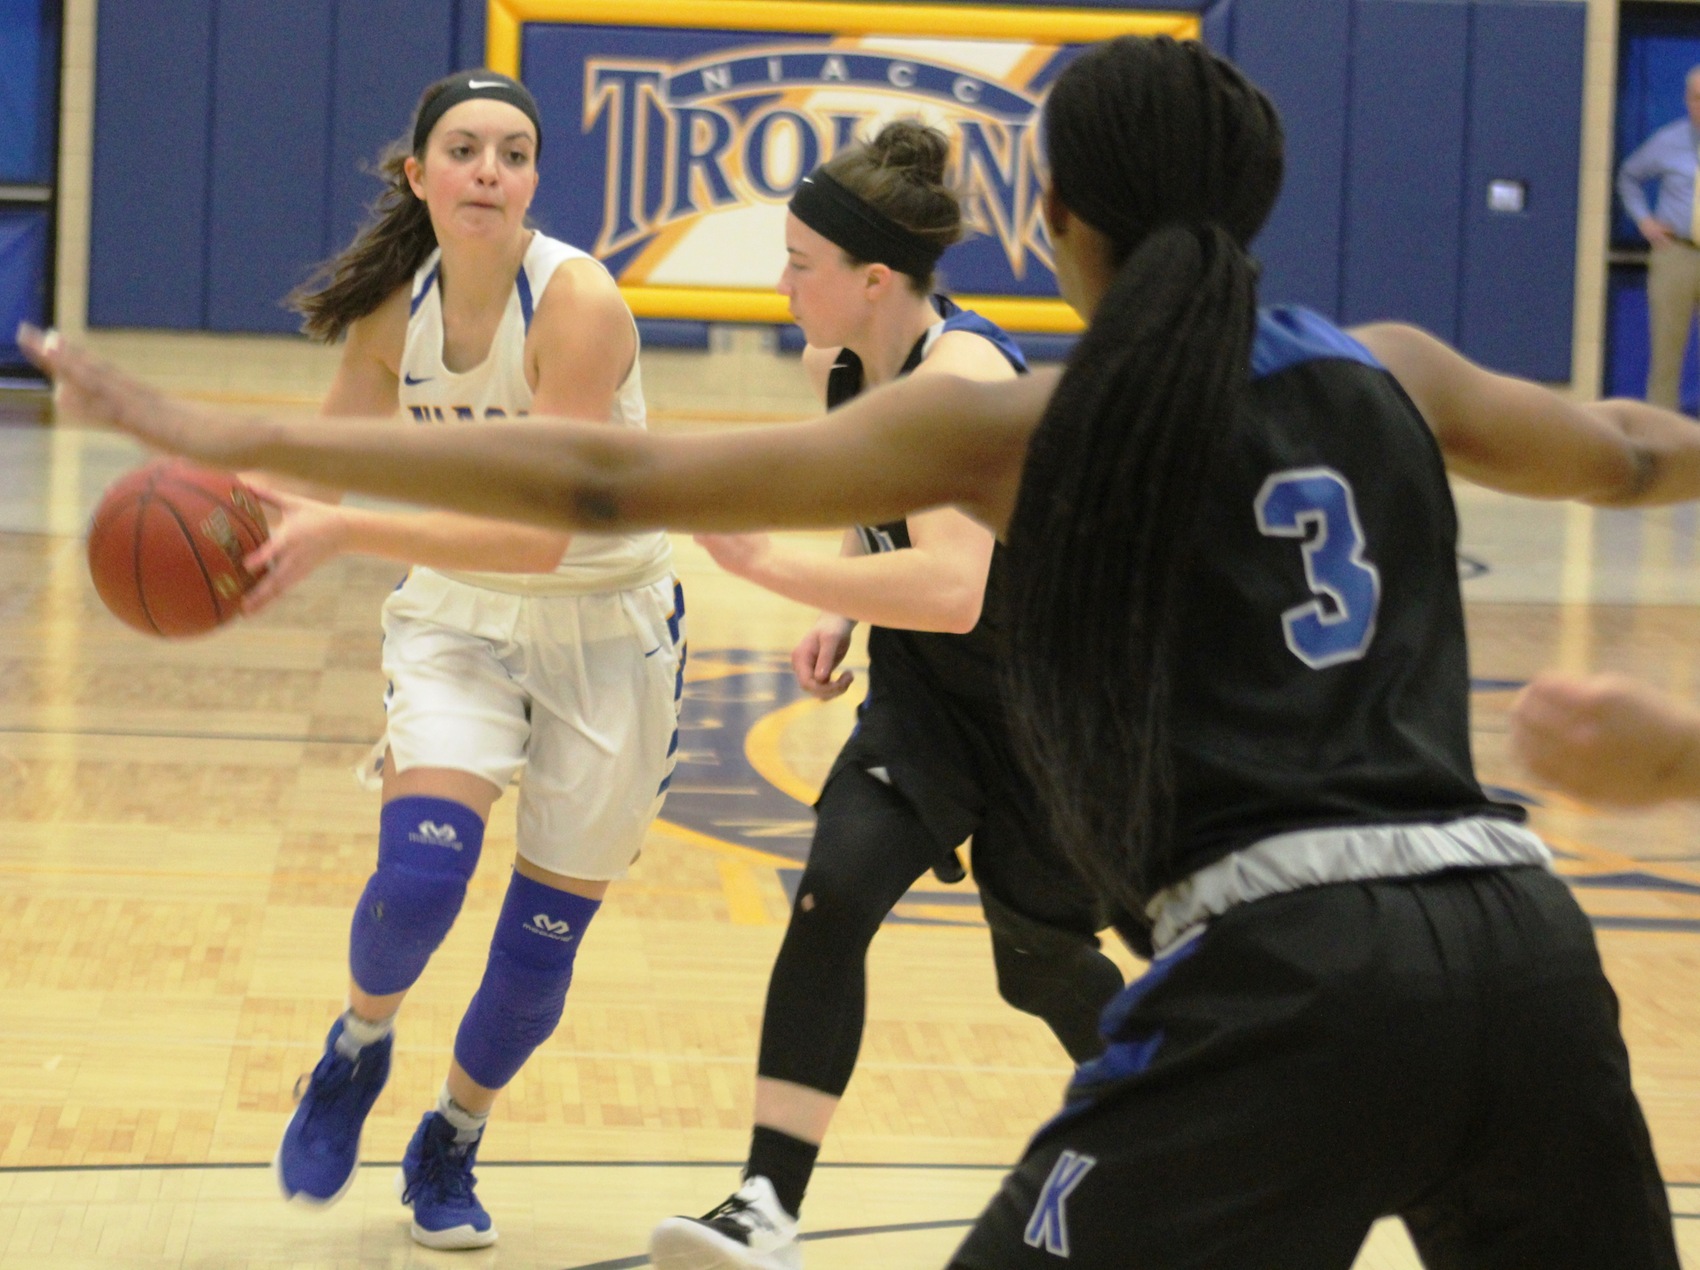 NIACC's Mandy Willems was selected as the national player of the week for the third time.